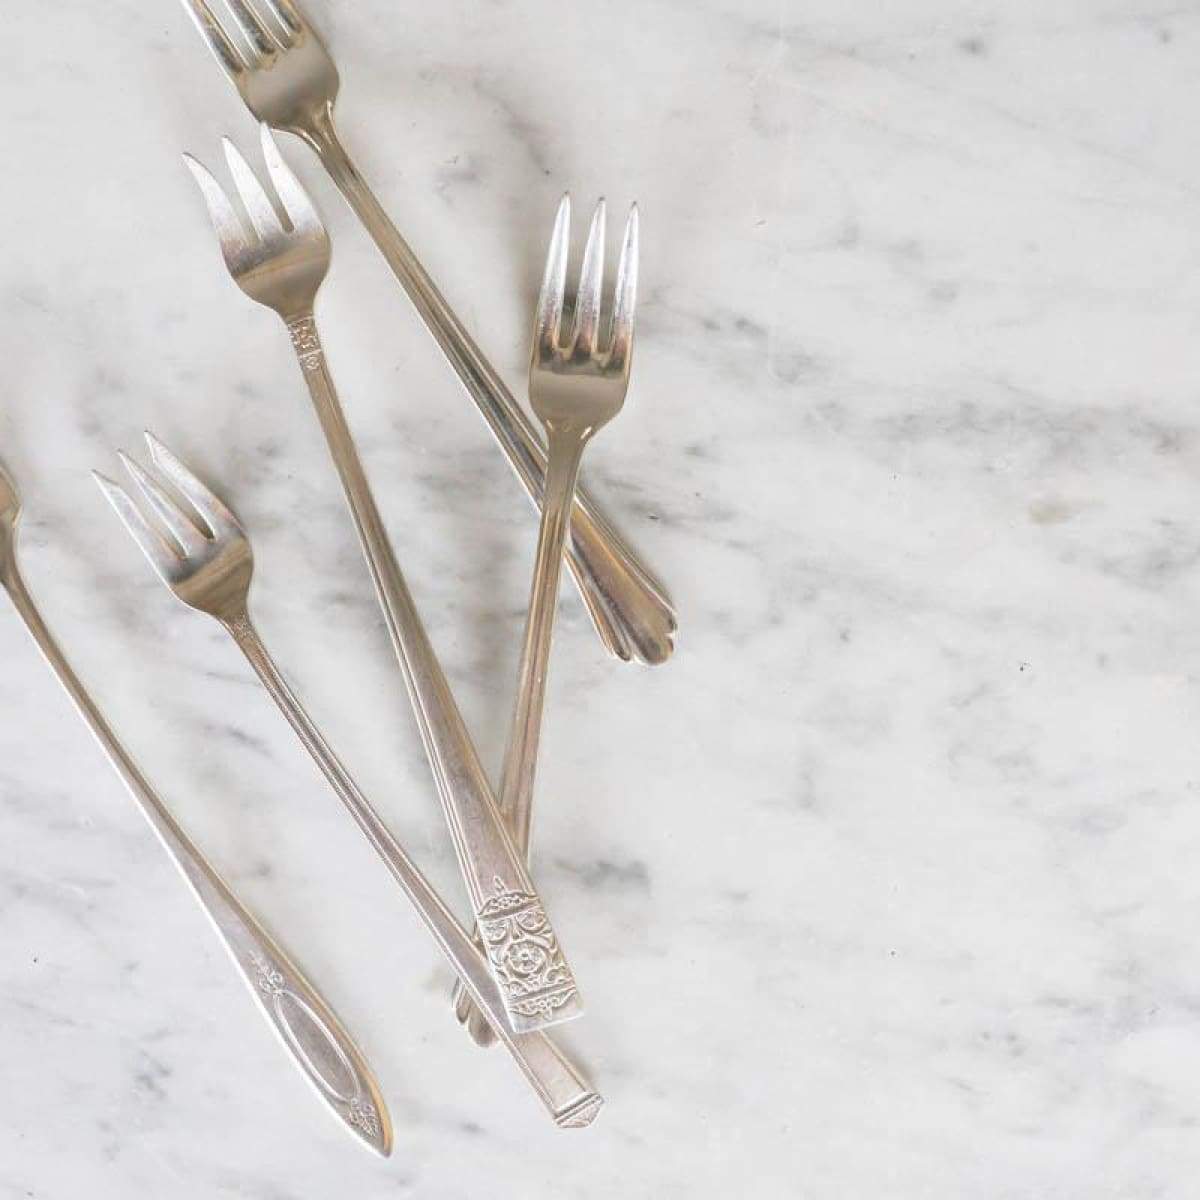 https://elsiegreen.com/cdn/shop/products/not-your-grandmas-vintage-relish-forks-set-of-8-fork-the-french-kitchen-20-piece-flatware-antique-silver-spoons-silverware-cutlery-tableware-127.jpg?v=1588167437